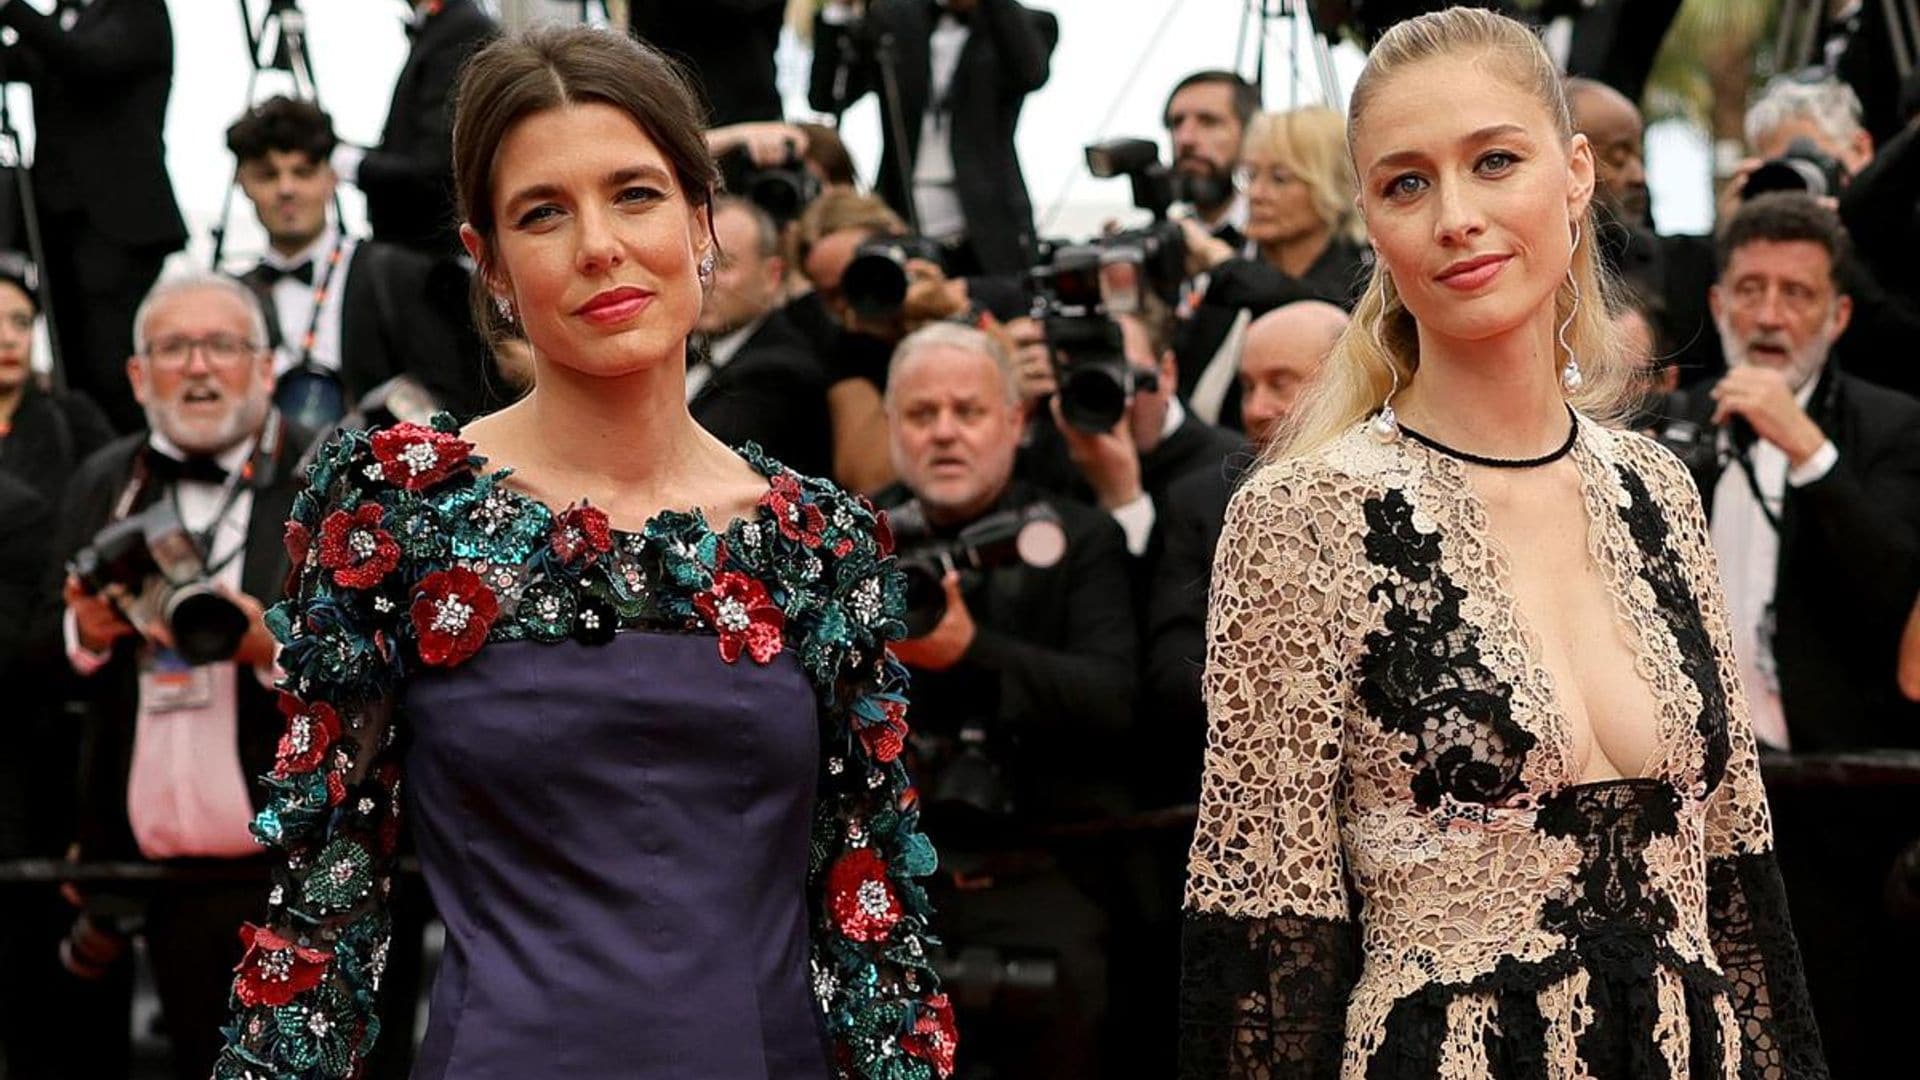 Charlotte Casiraghi and sister-in-law Beatrice hit the red carpet at Cannes Film Festival